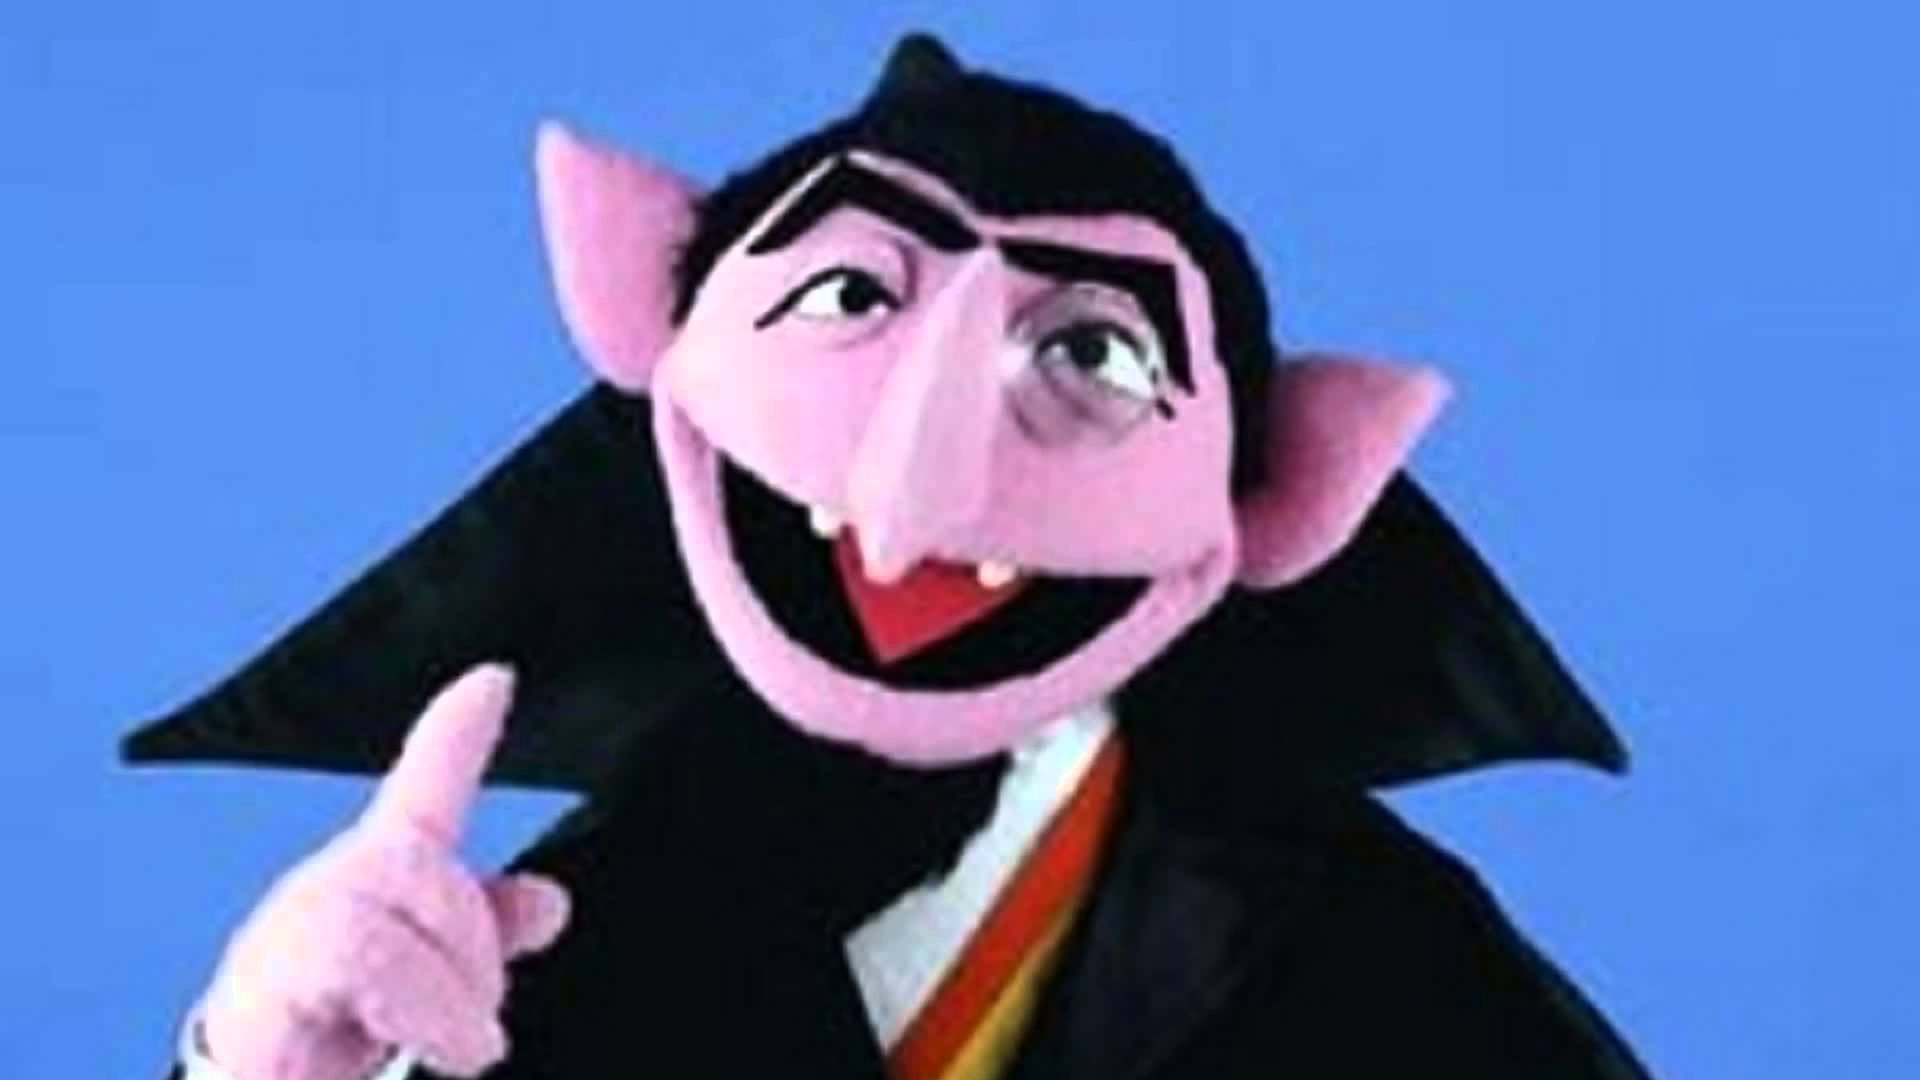 Sesame Street: The Count Von Count counts Pi to 000 places Eric Alper